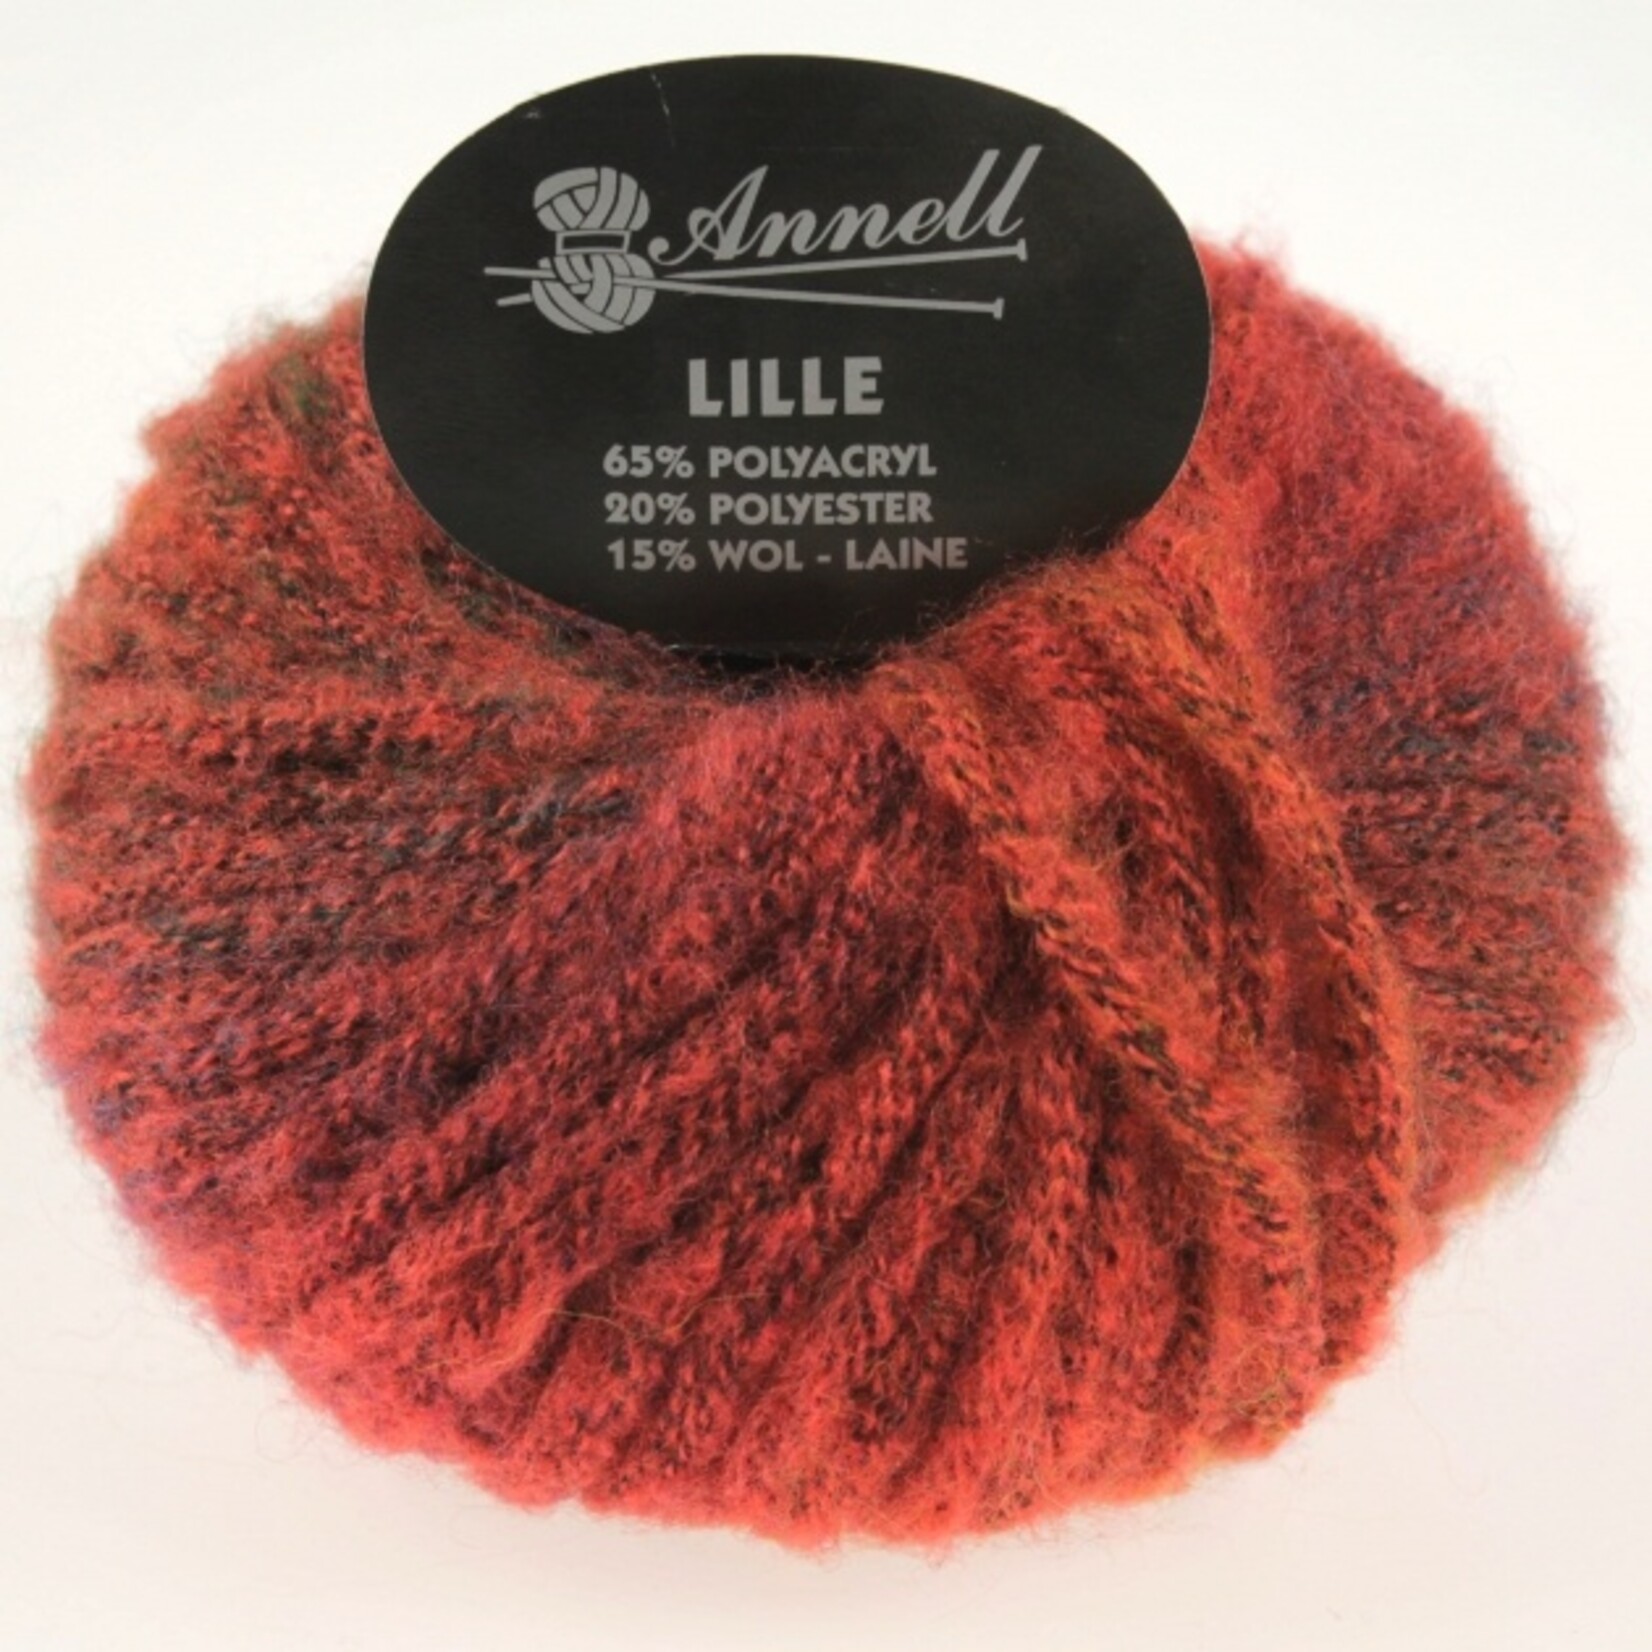 annell lille 2408